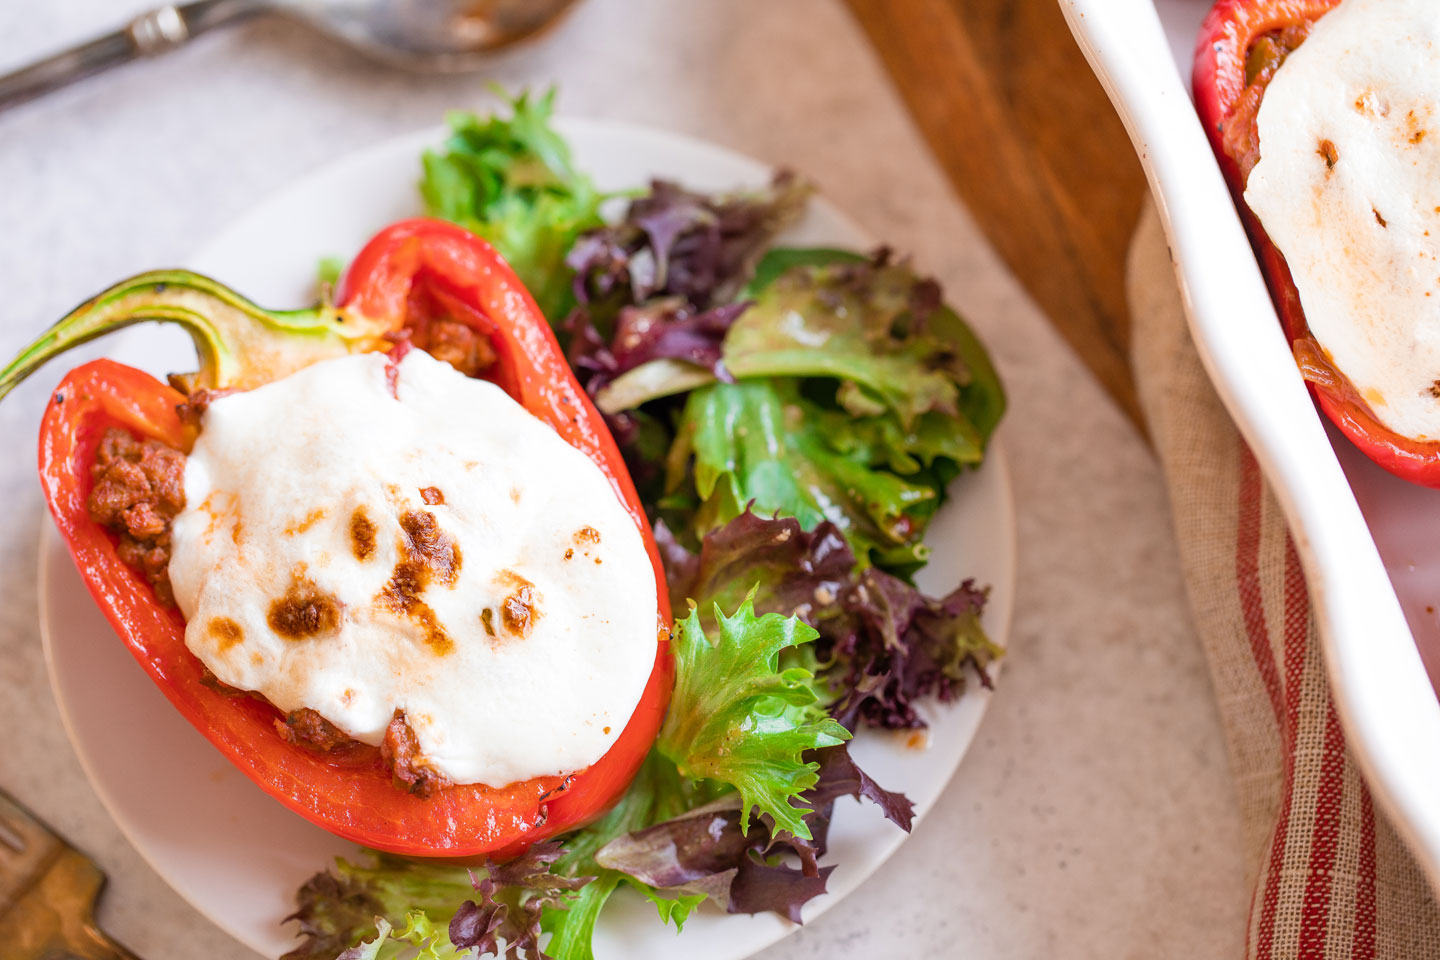 One stuffed pepper on a white plate with Italian salad.